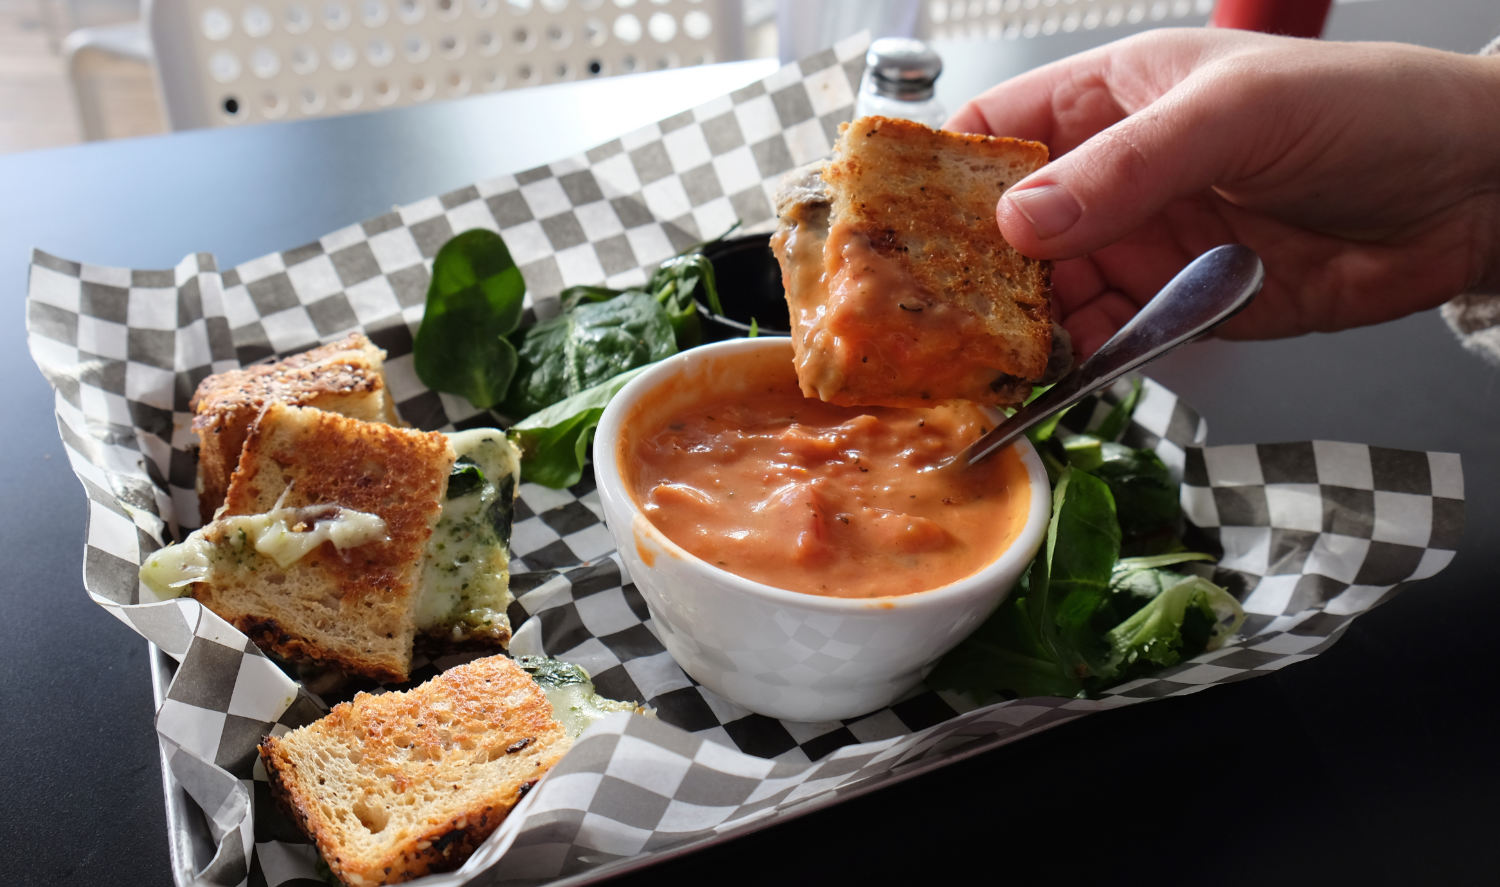 hand dipping grilled cheese sandwich into cup of tomato soap